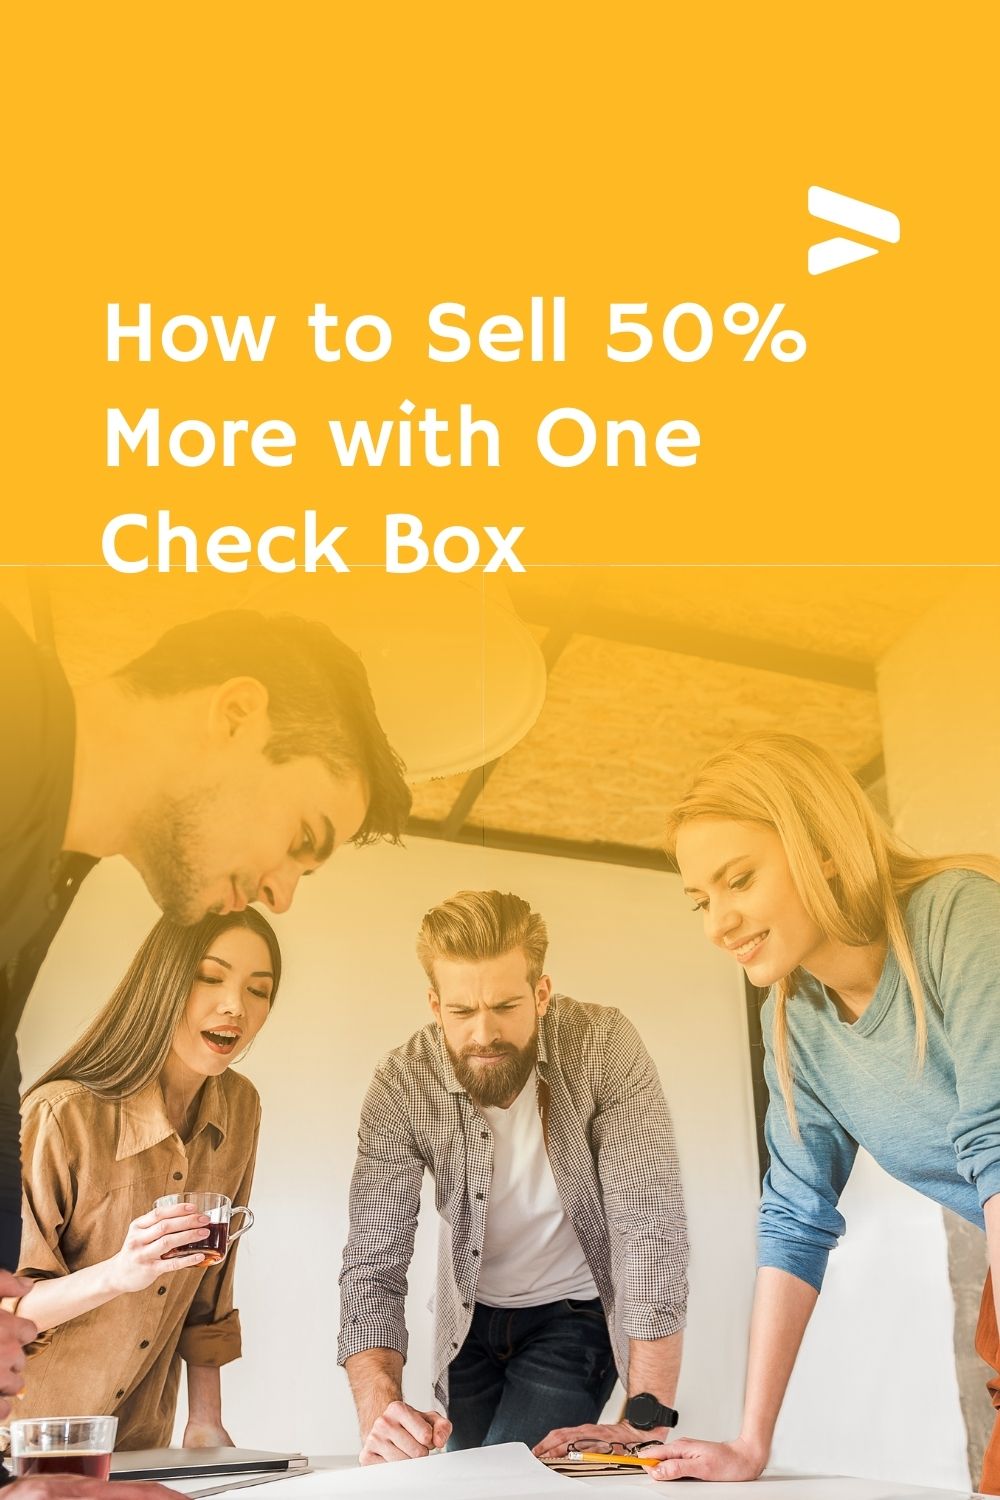 How to Sell 50% More with One Check Box